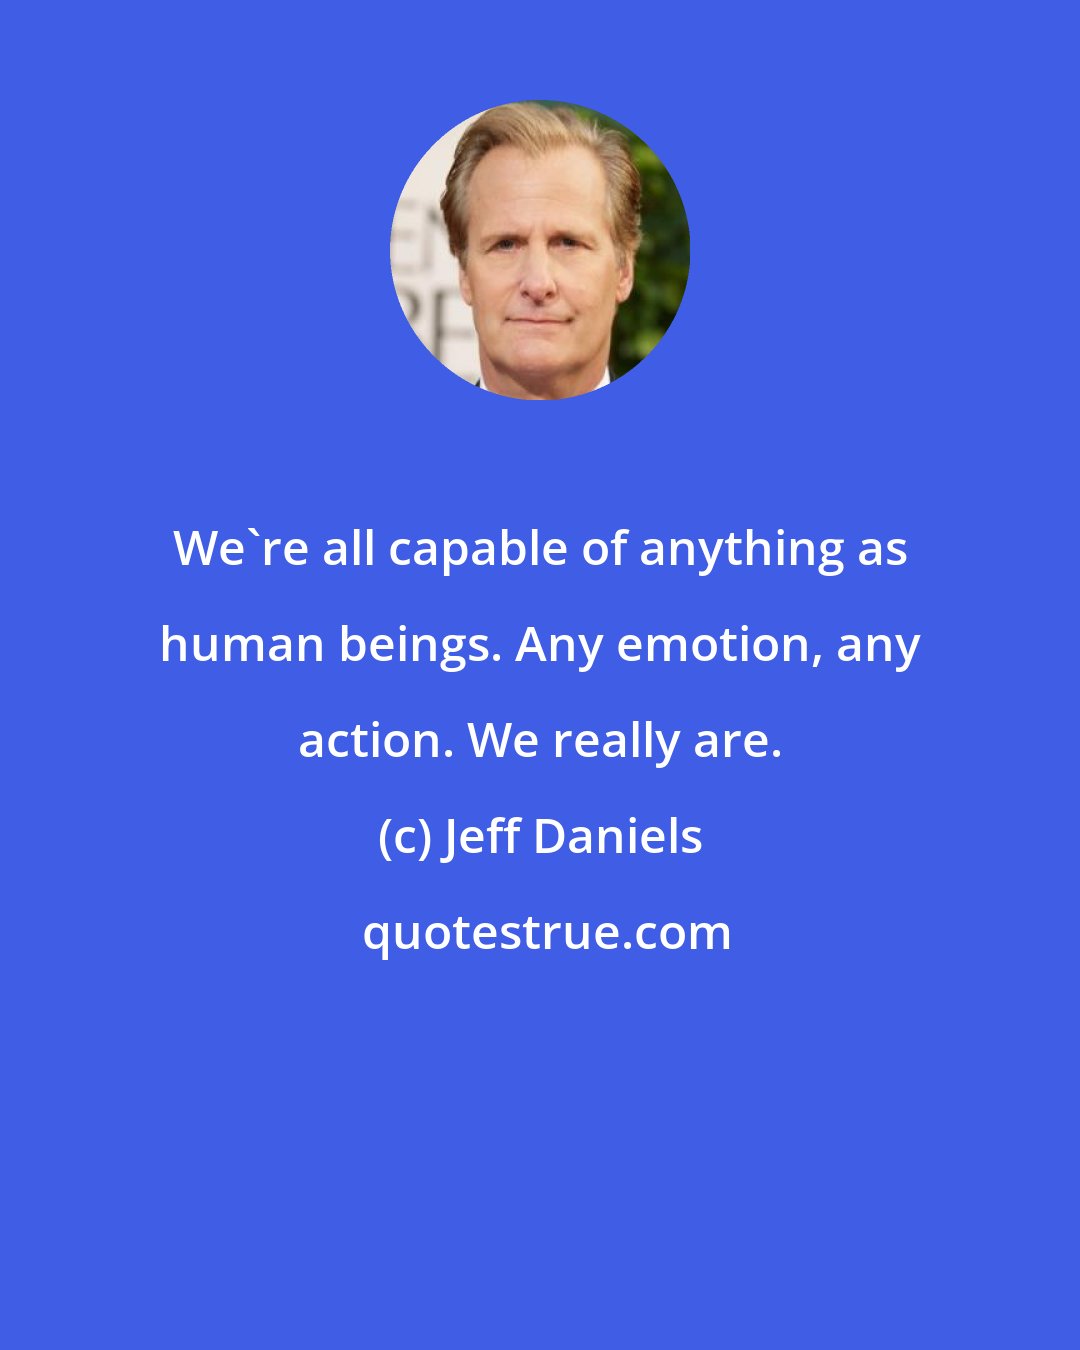 Jeff Daniels: We're all capable of anything as human beings. Any emotion, any action. We really are.